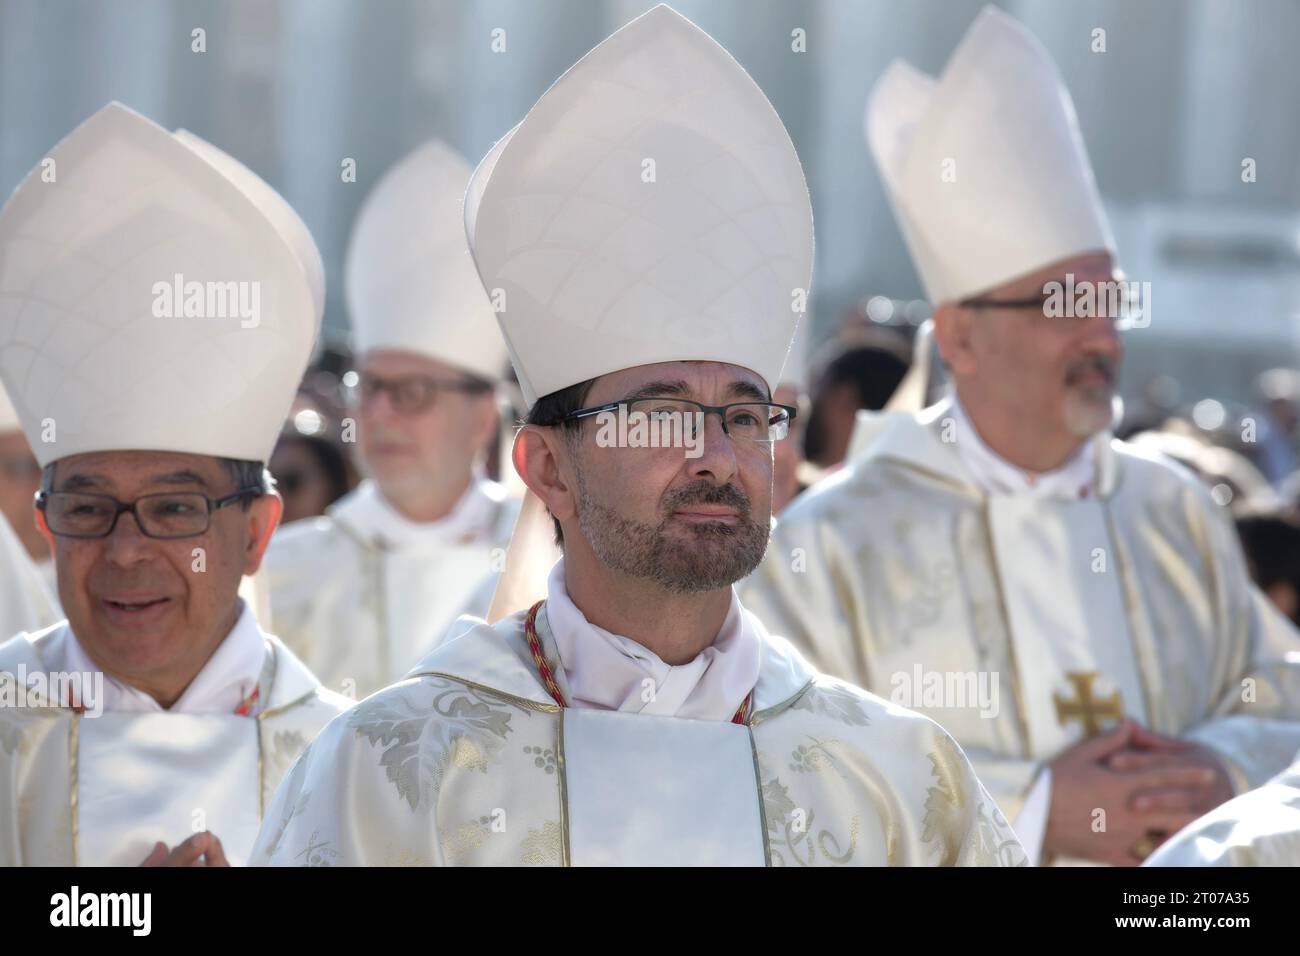 Vatican City, Vatican, 04 October 2023. Cardinal Josè Cobo Cano arrives for a mass presided over by Pope Francis for the start of the XVI General Assembly of the Synod of Bishops in St. Peter's Square at the Vatican. Maria Grazia Picciarella/Alamy Live News Stock Photo